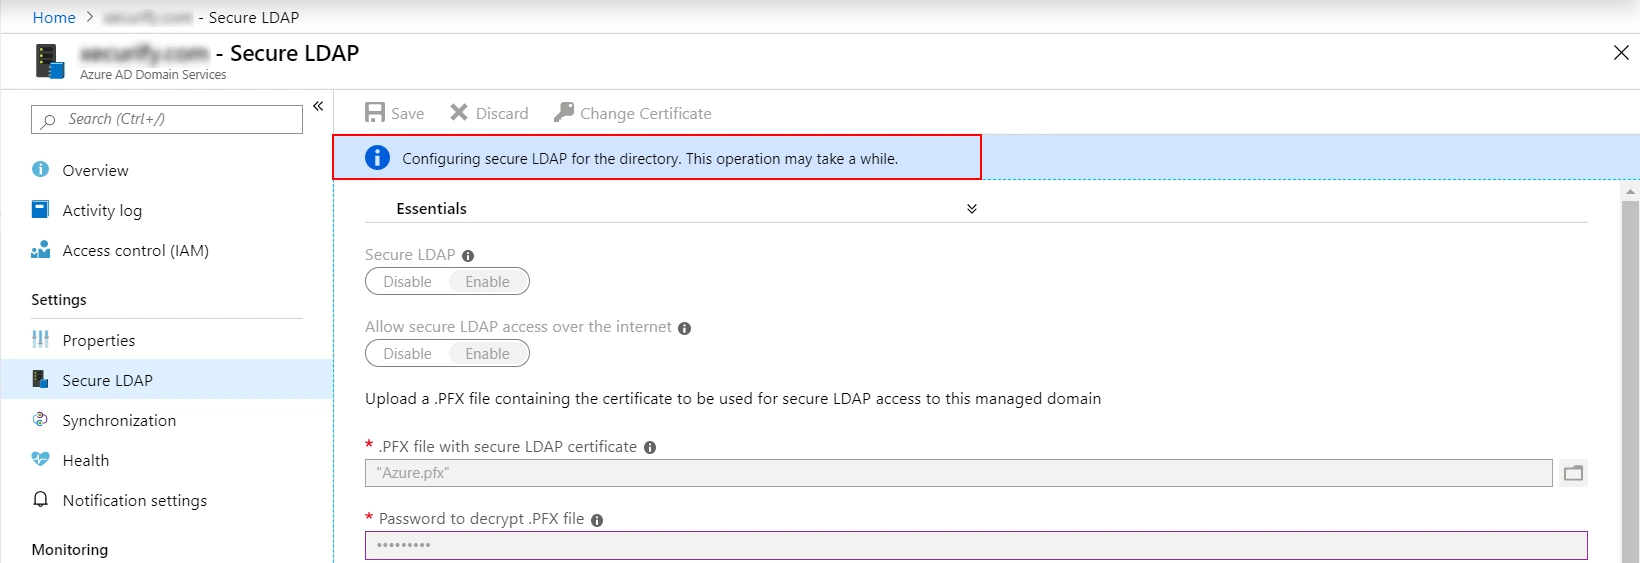 Azure AD Secure Ldap configured for the managed domain